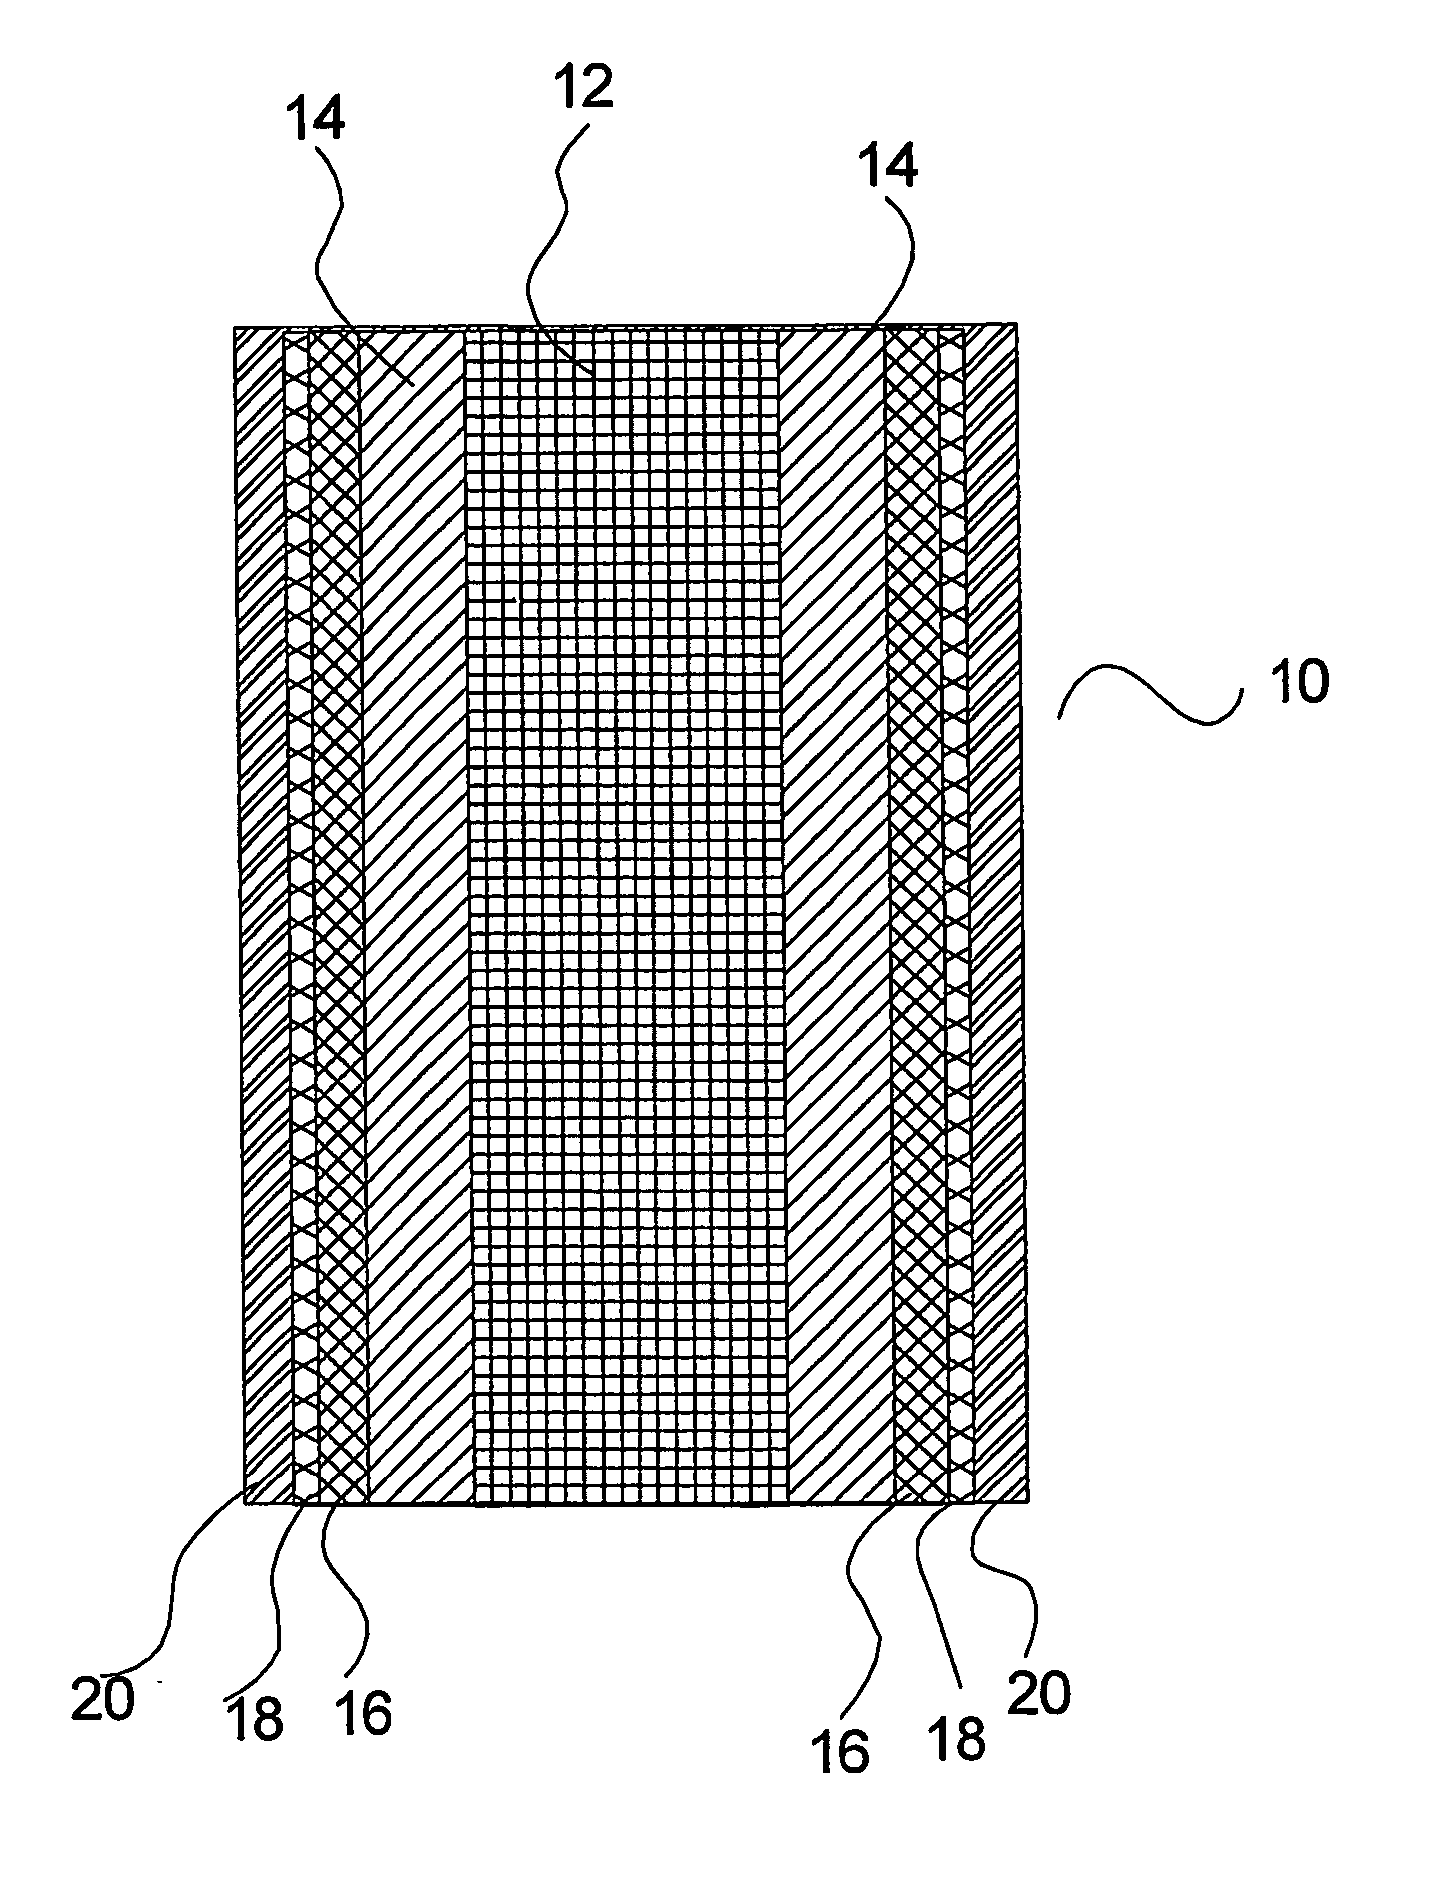 Metal-supported tubular fuel cell